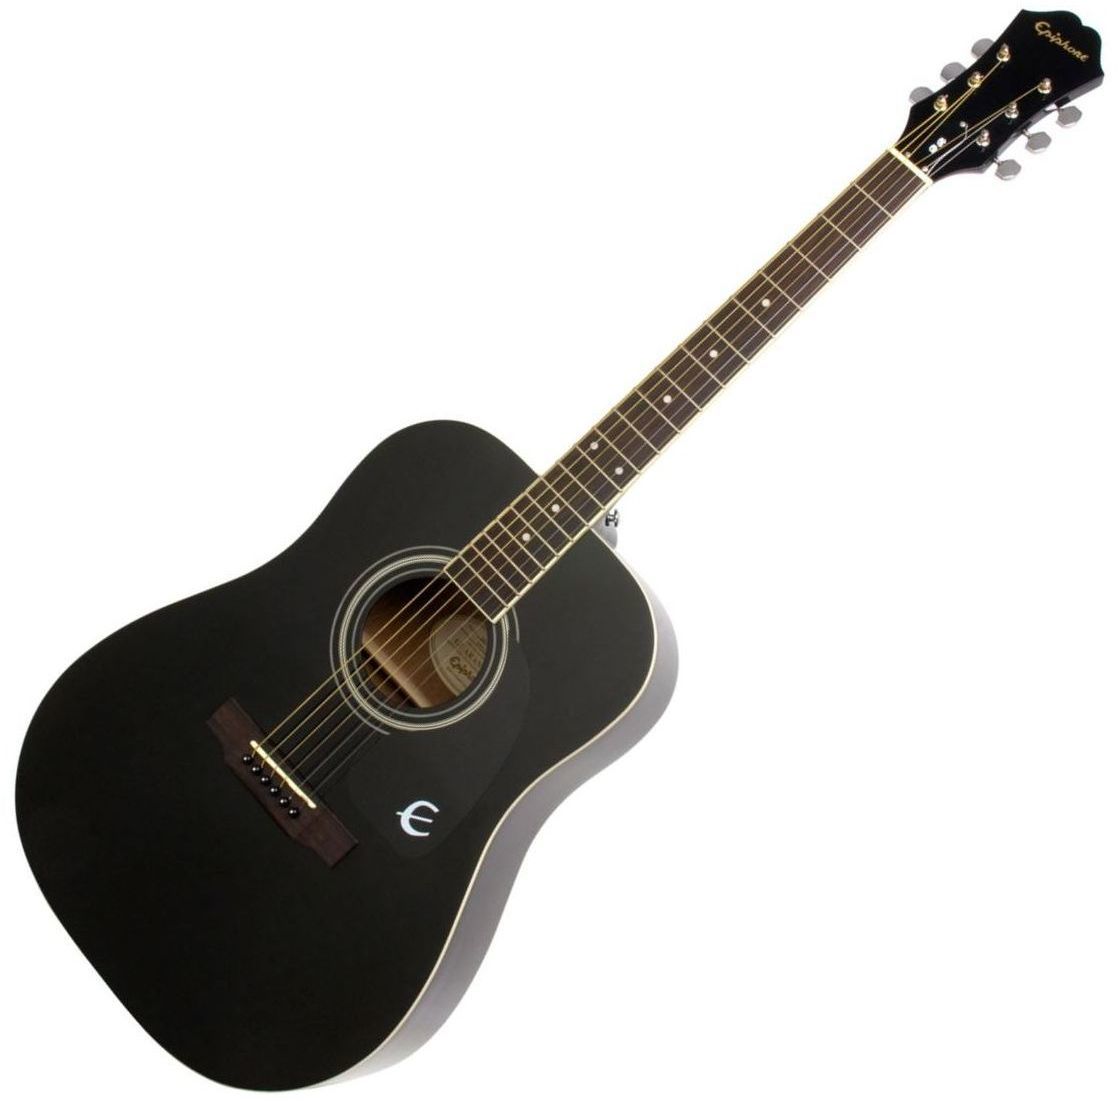 Epiphone Songmaker DR-100 Eq Added - Ebony Solid Top Acoustic Guitar